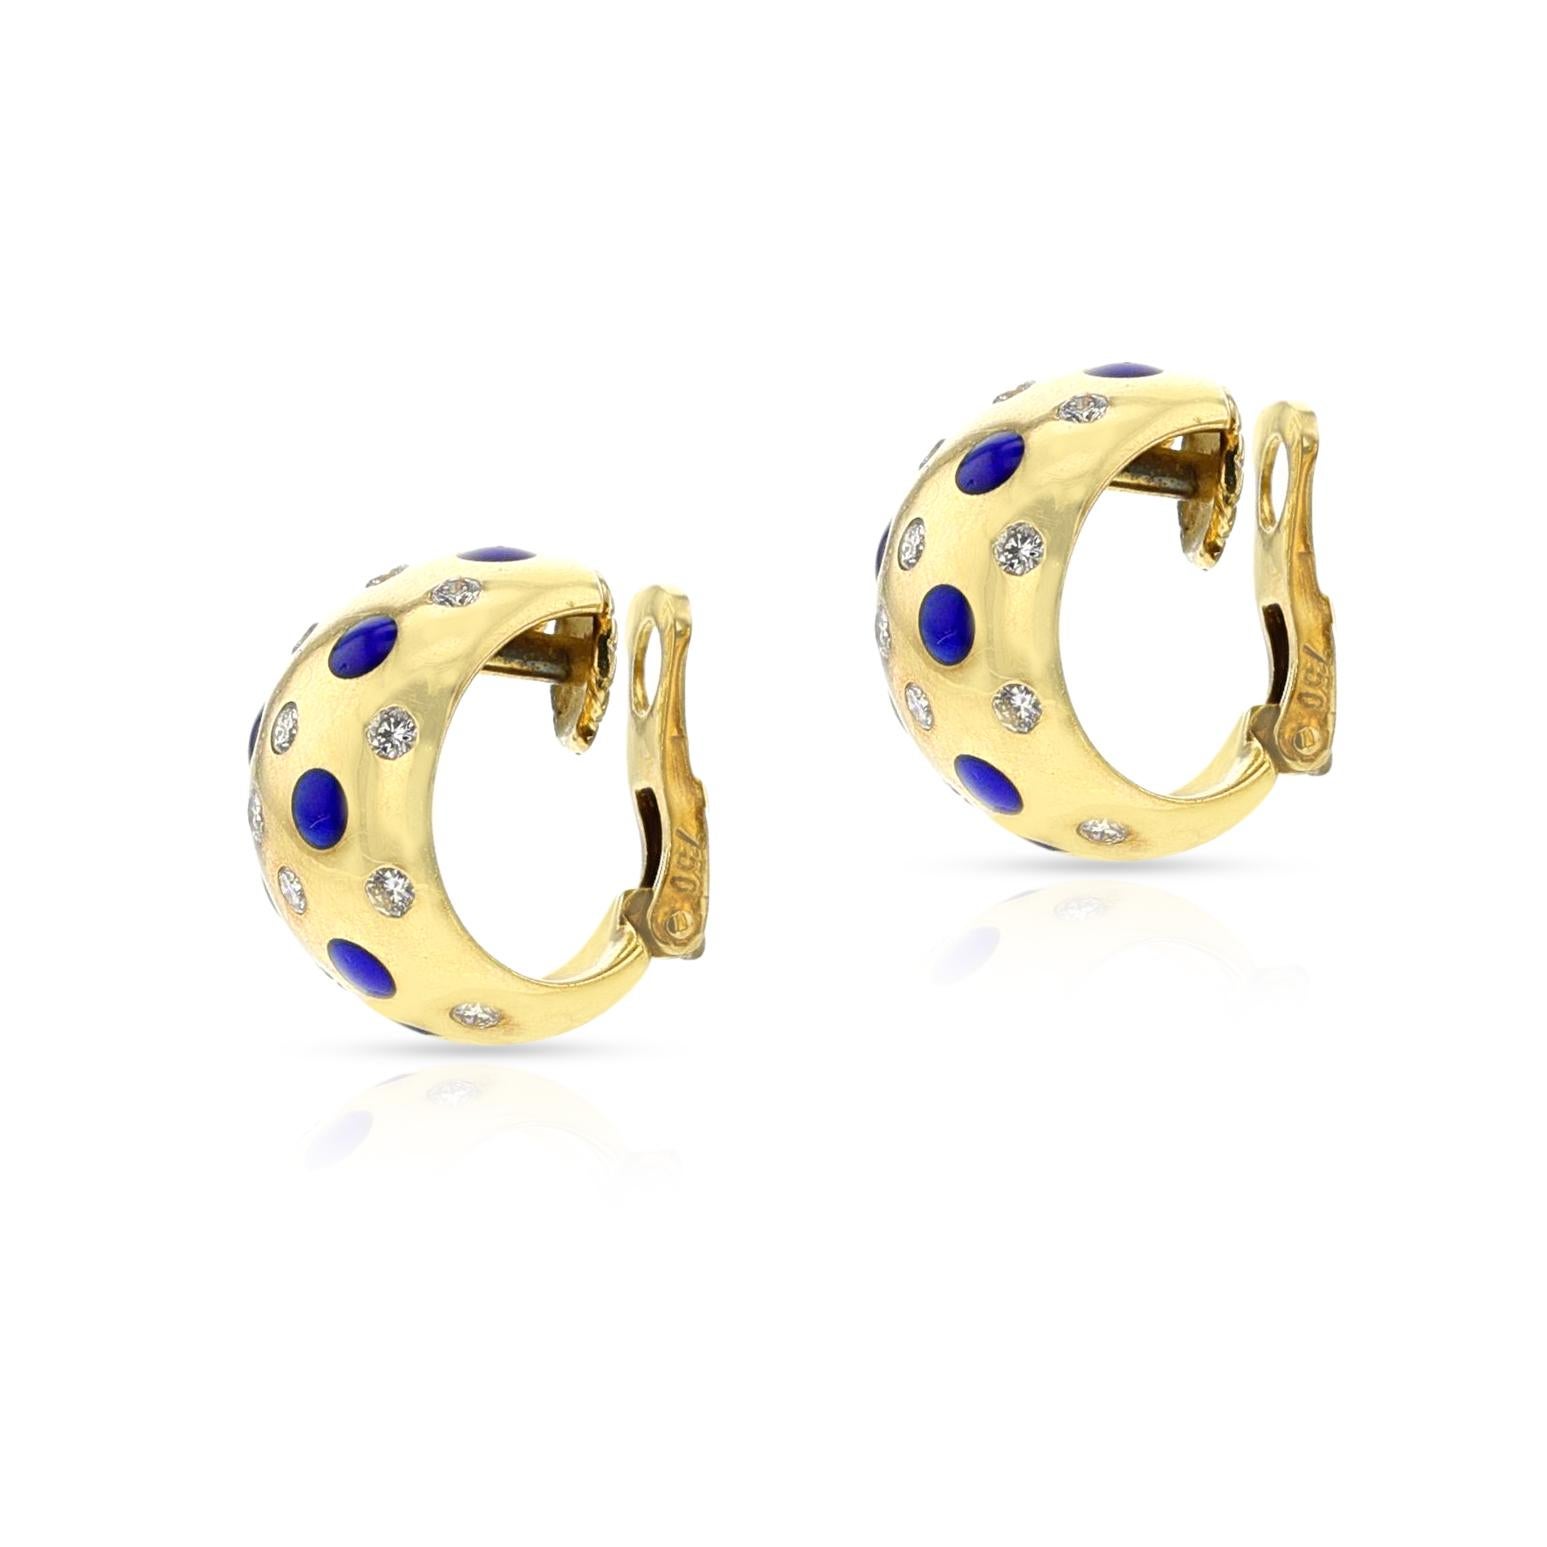 Van Cleef & Arpels Plique a Jour Enamel and Diamond Earring and Ring Set, 18k For Sale 2